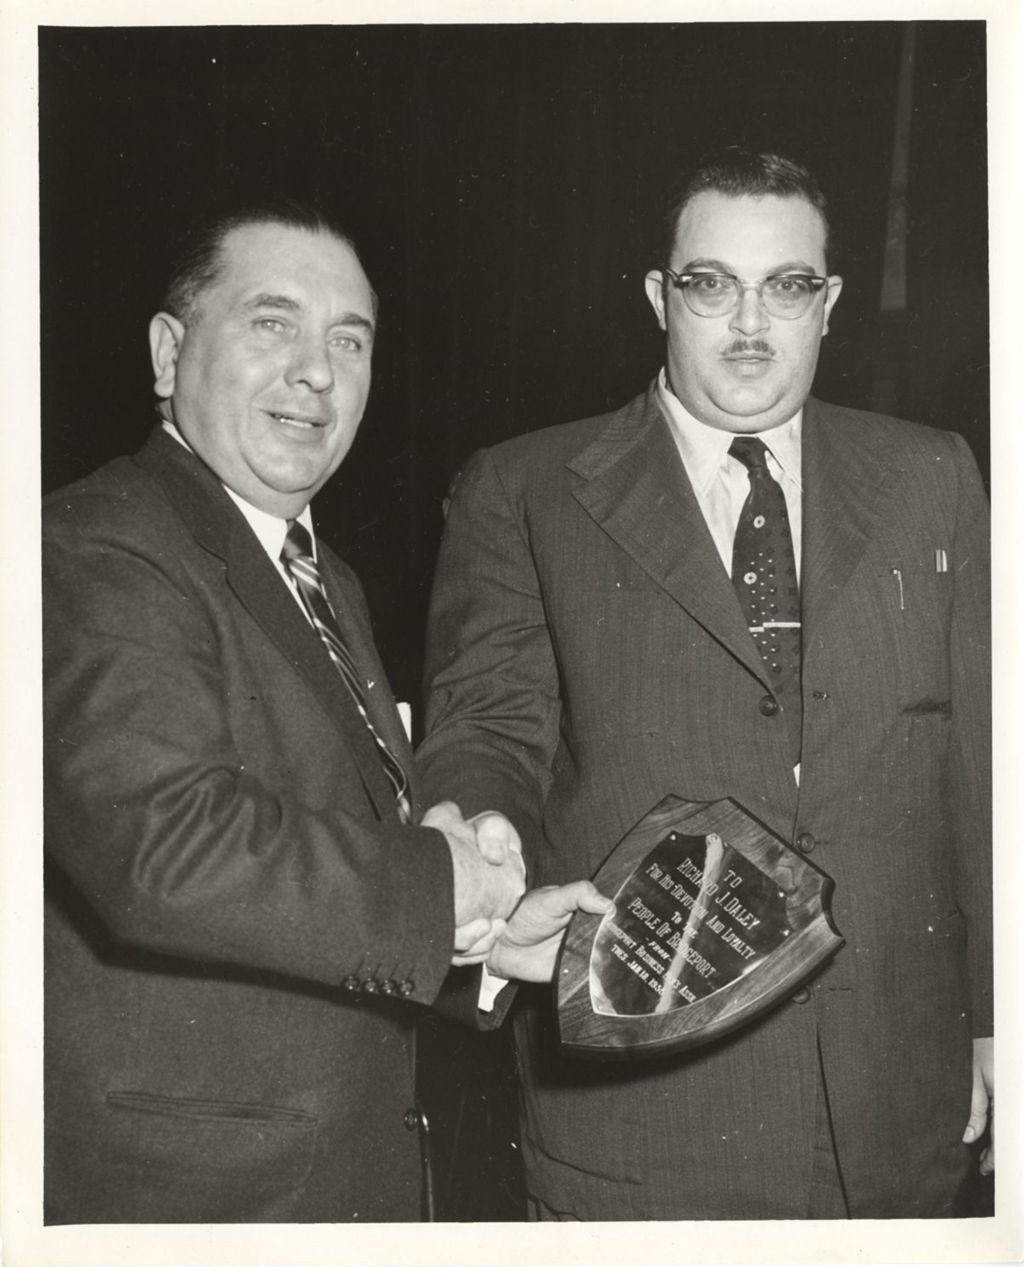 Richard J. Daley accepting a plaque